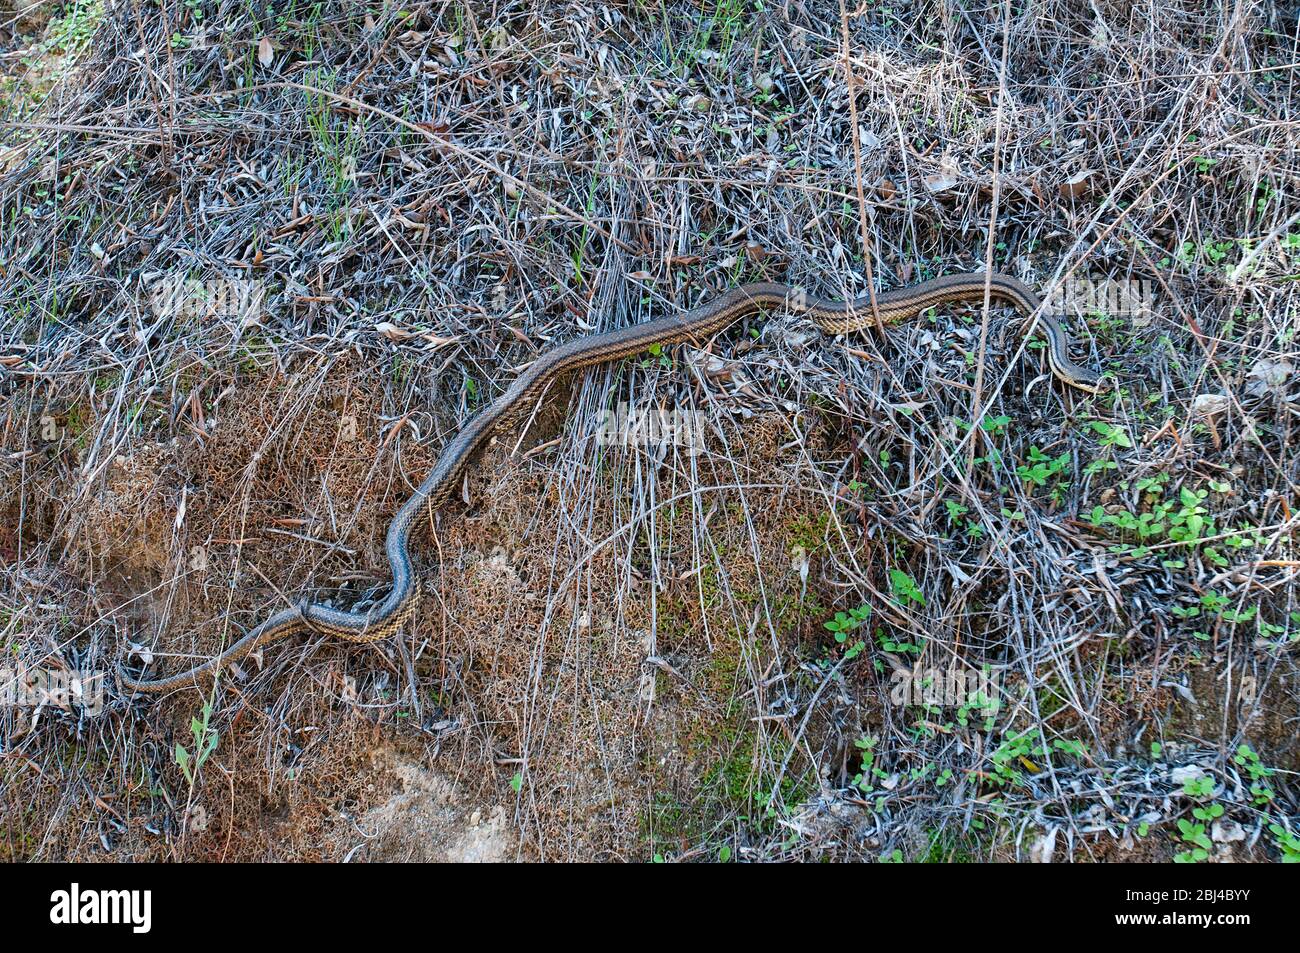 Four-lined snake, non-venomous species camouflaged in foliage, Corfu, Greece Stock Photo